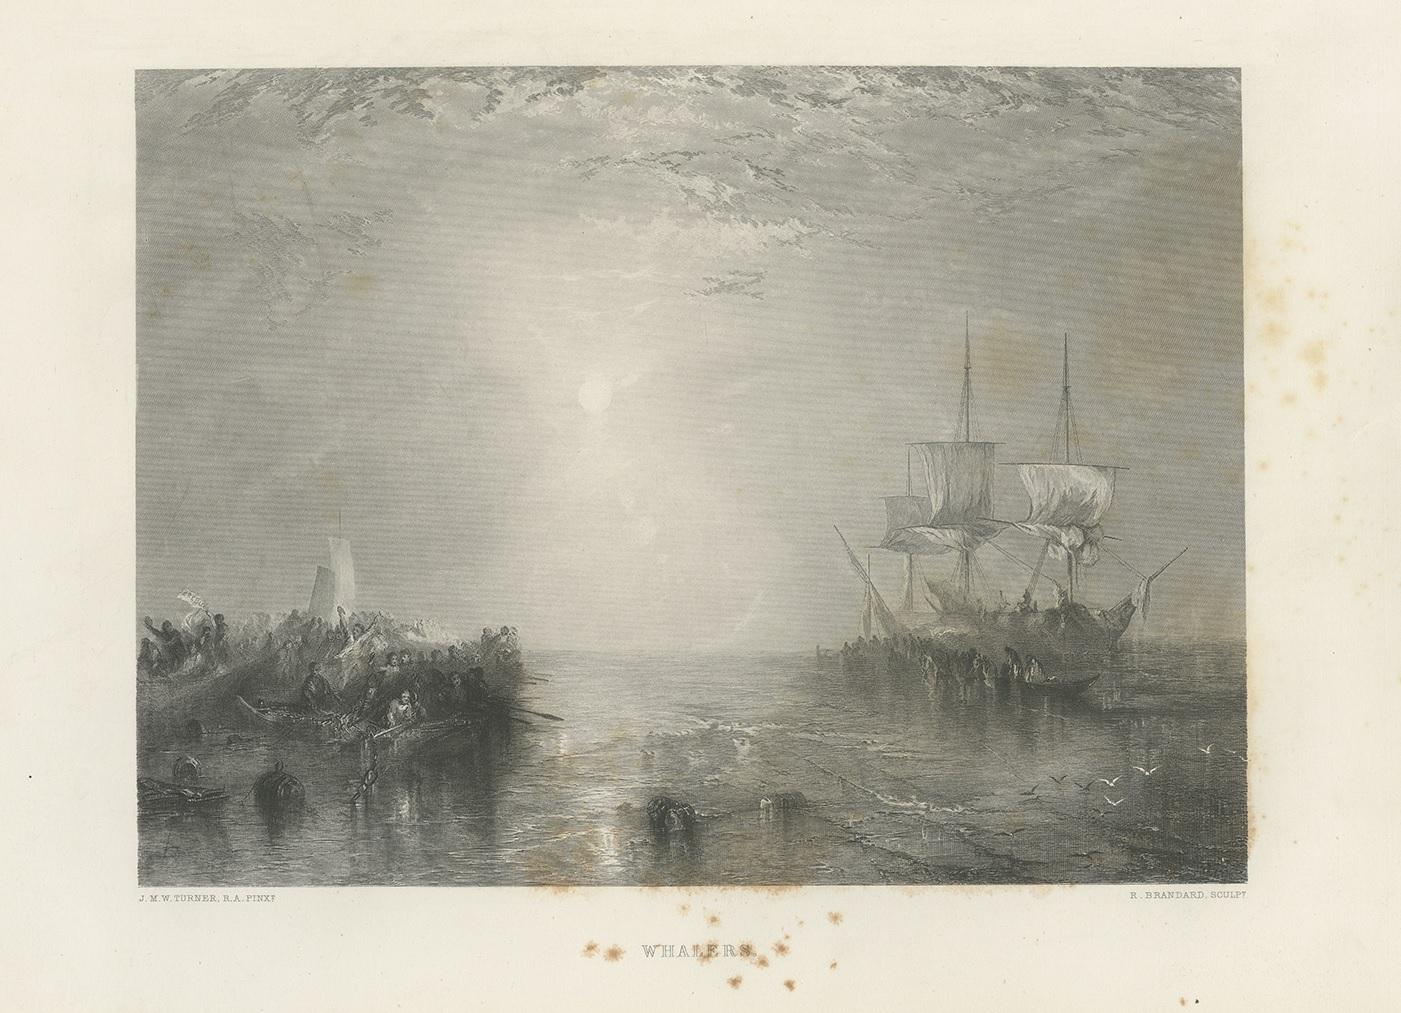 Antique print titled 'Whalers'. Steel engraving of a whaling ship. Engraved by R. Brandard after a painting by J.M.W. Turner. Published in London by Virtue & Co.